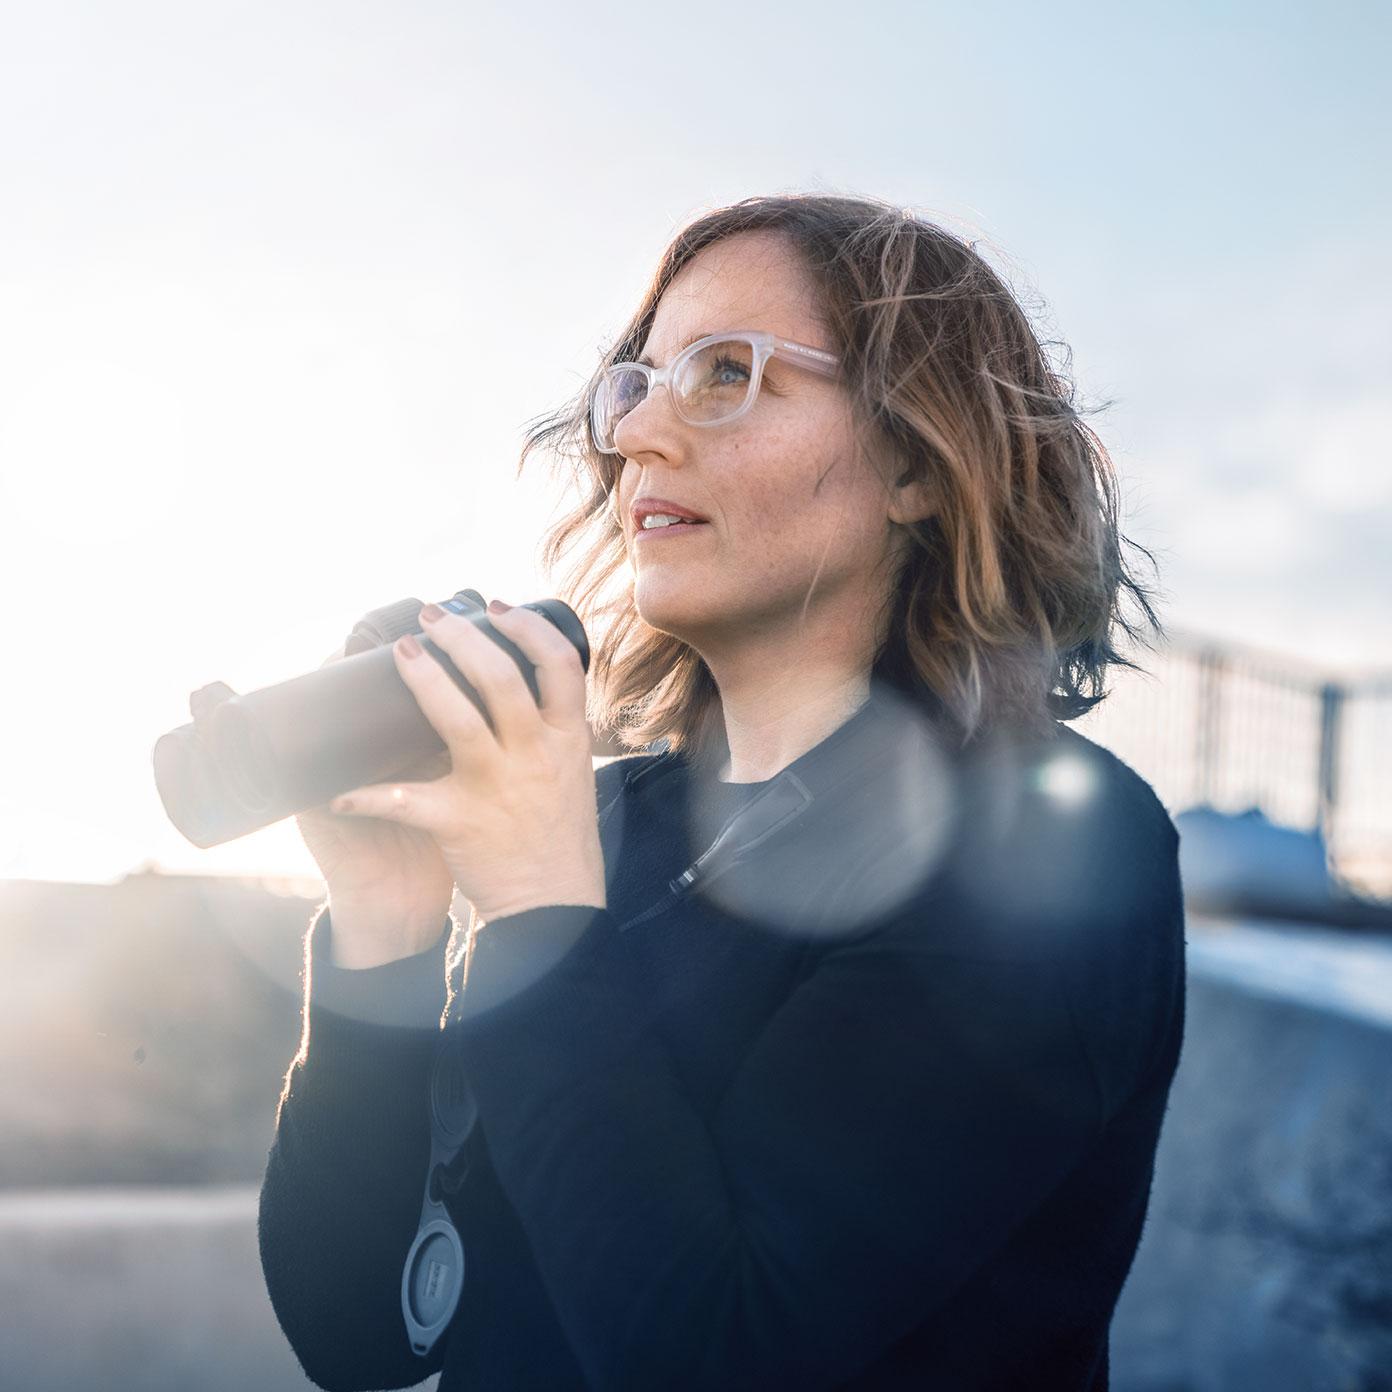 ZEISS products for nature observation